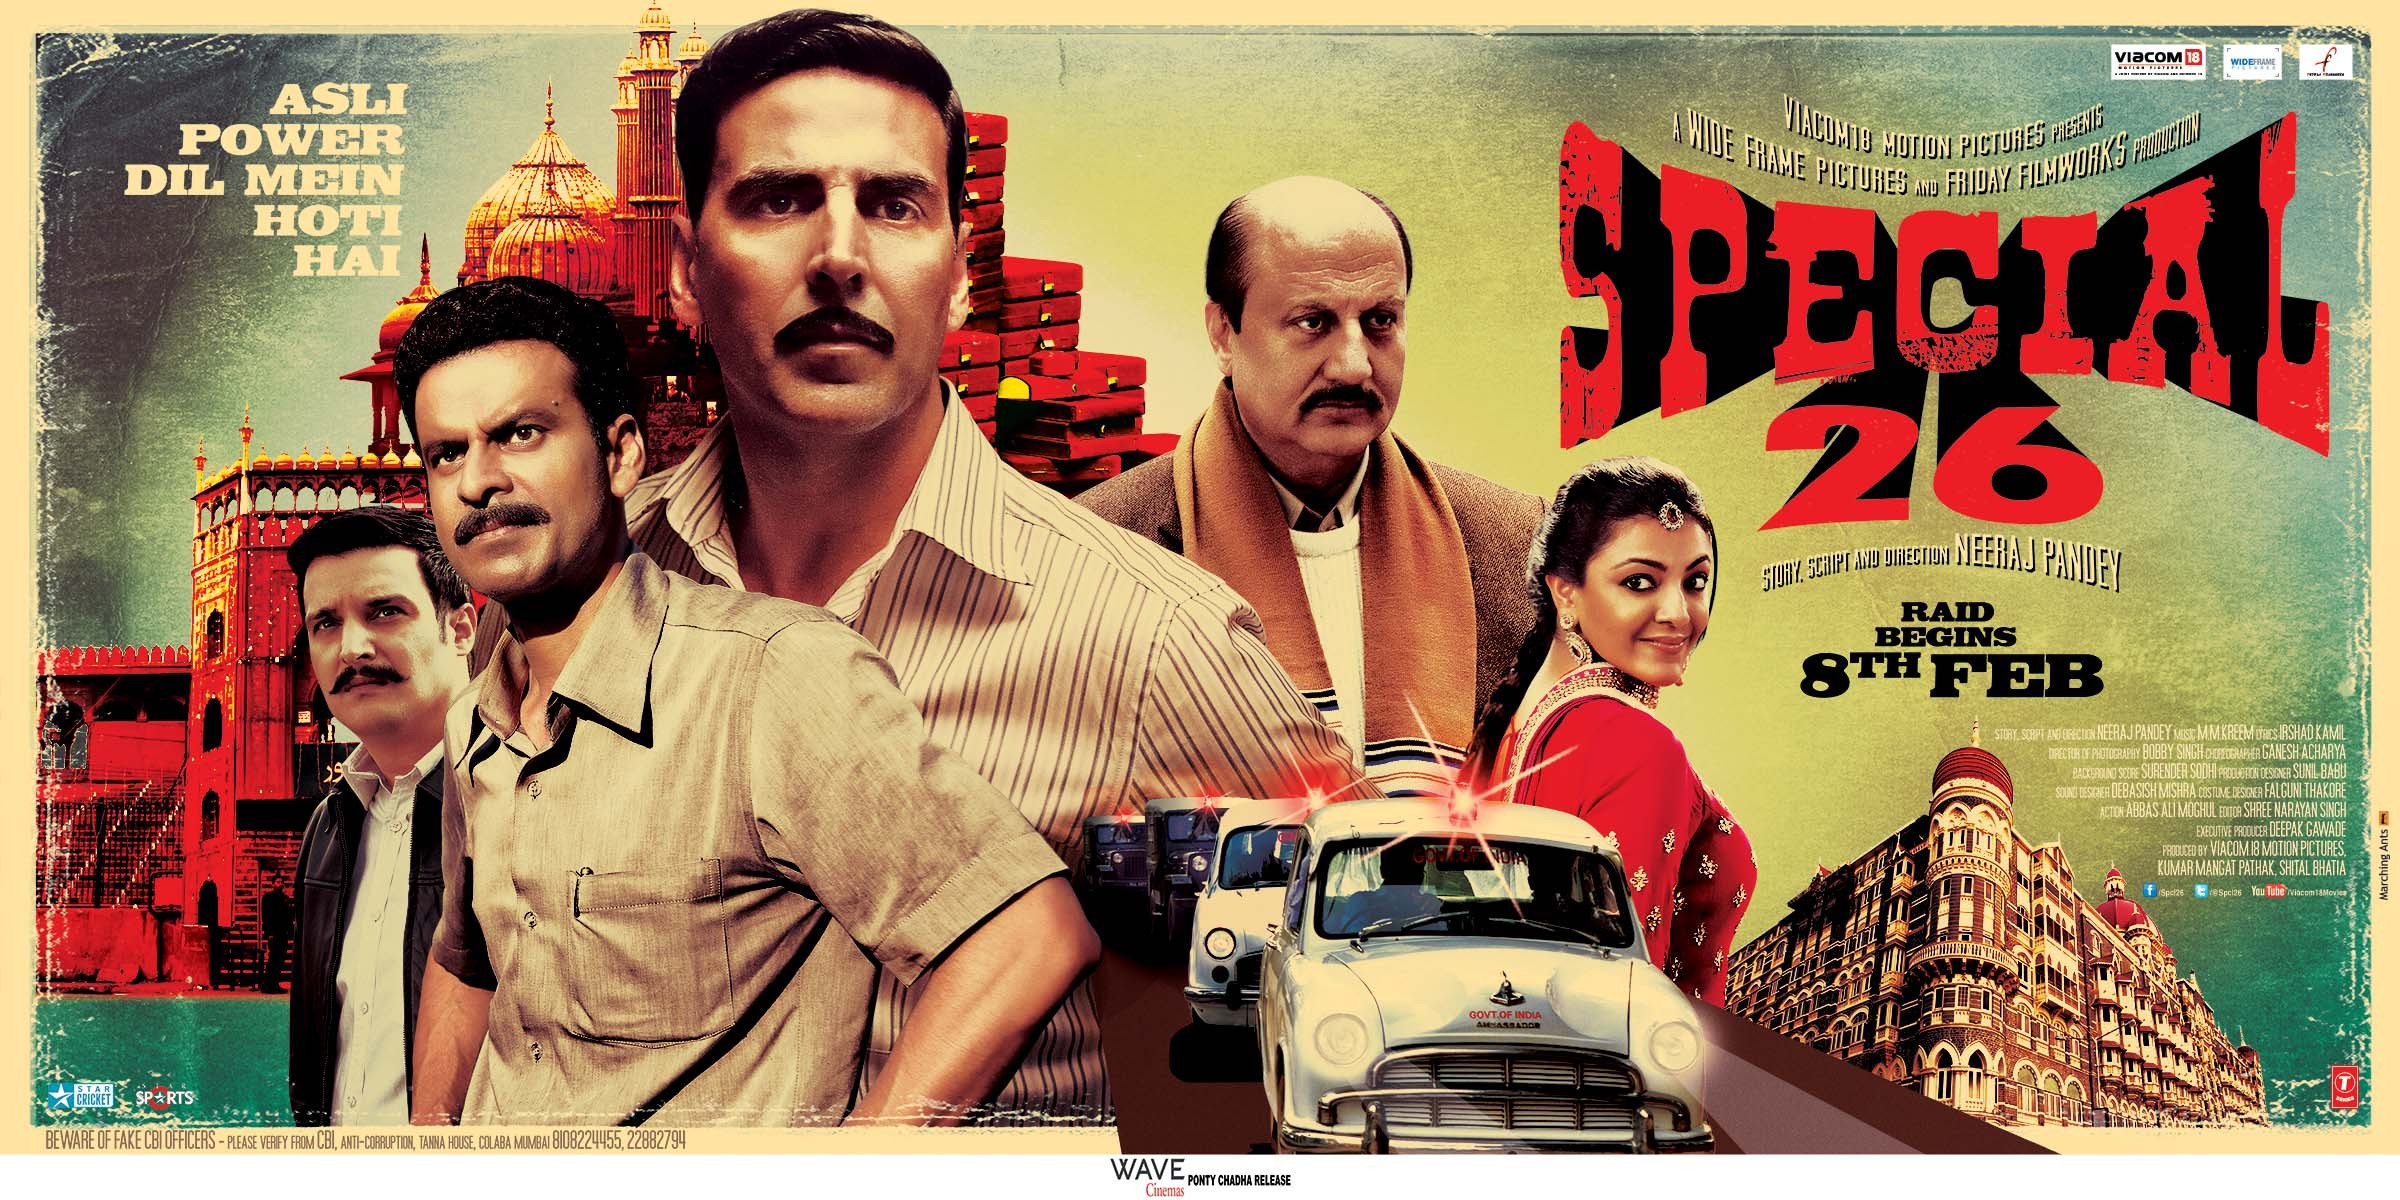 SPECIAL 26 (2013 Film) Cast, Budget, Box Office, Story, Real Names, Wiki, Release Date